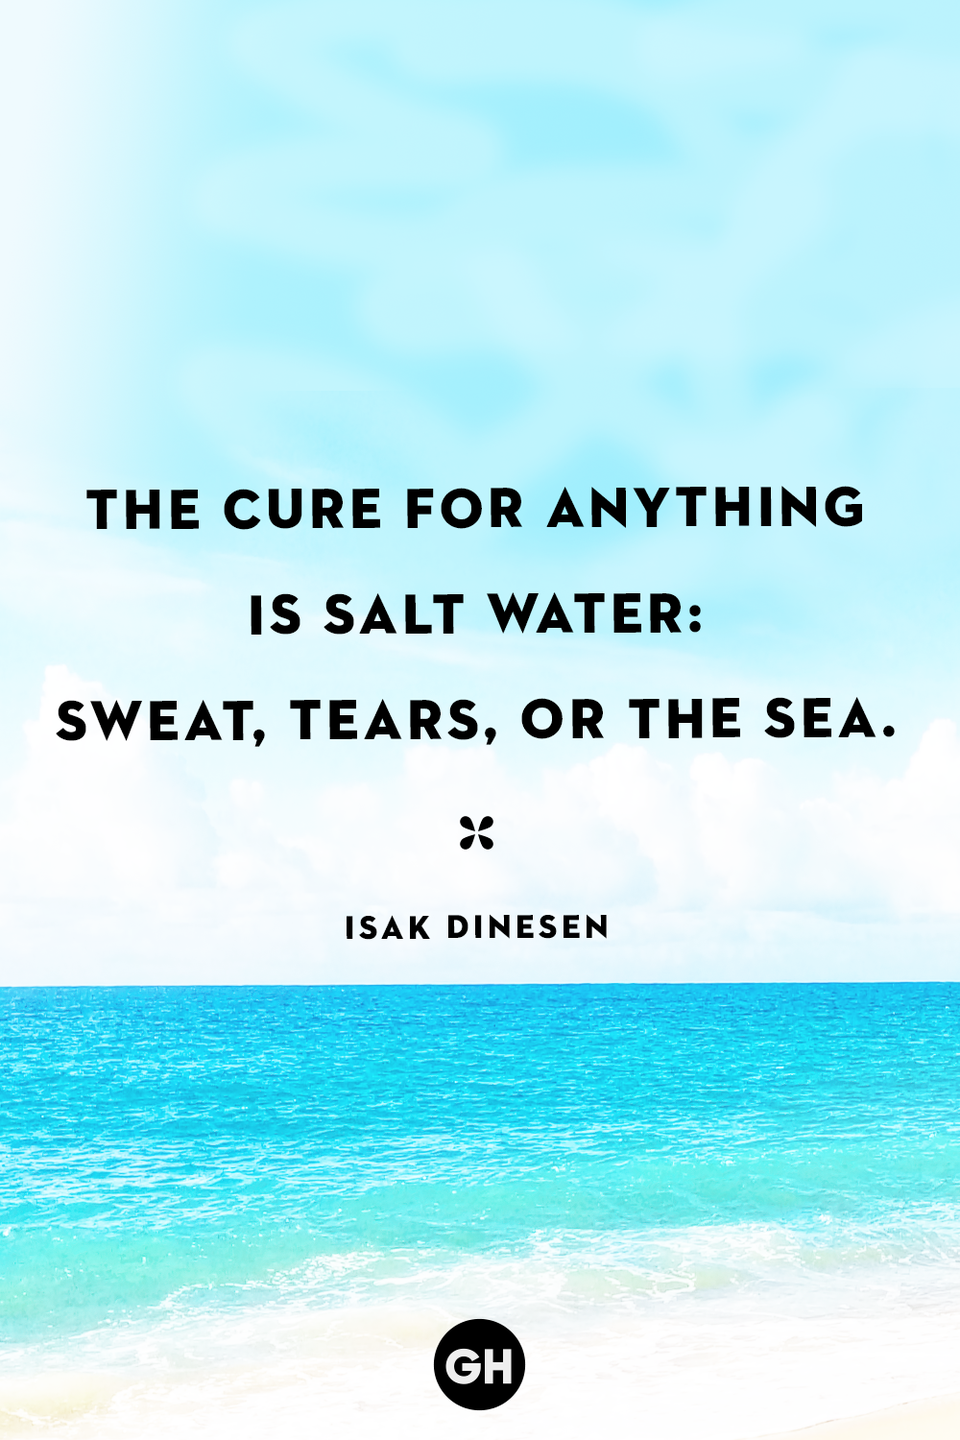 <p>The cure for anything is salt water: sweat, tears, or the sea.</p>